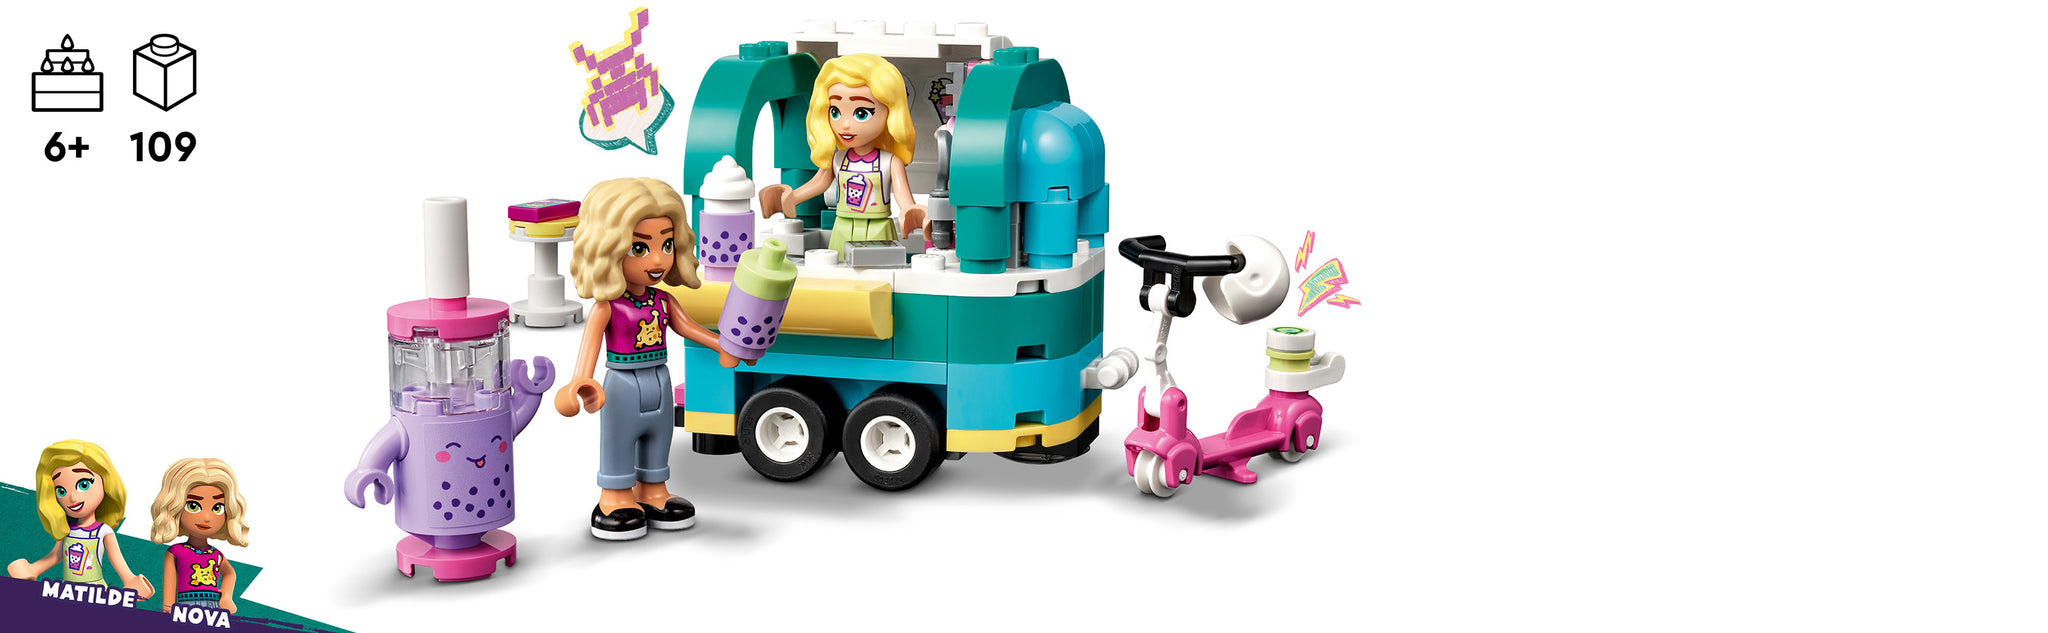 https://www.2ttoys.nl/pages/lego-41733-mobiele-buikthee-stand